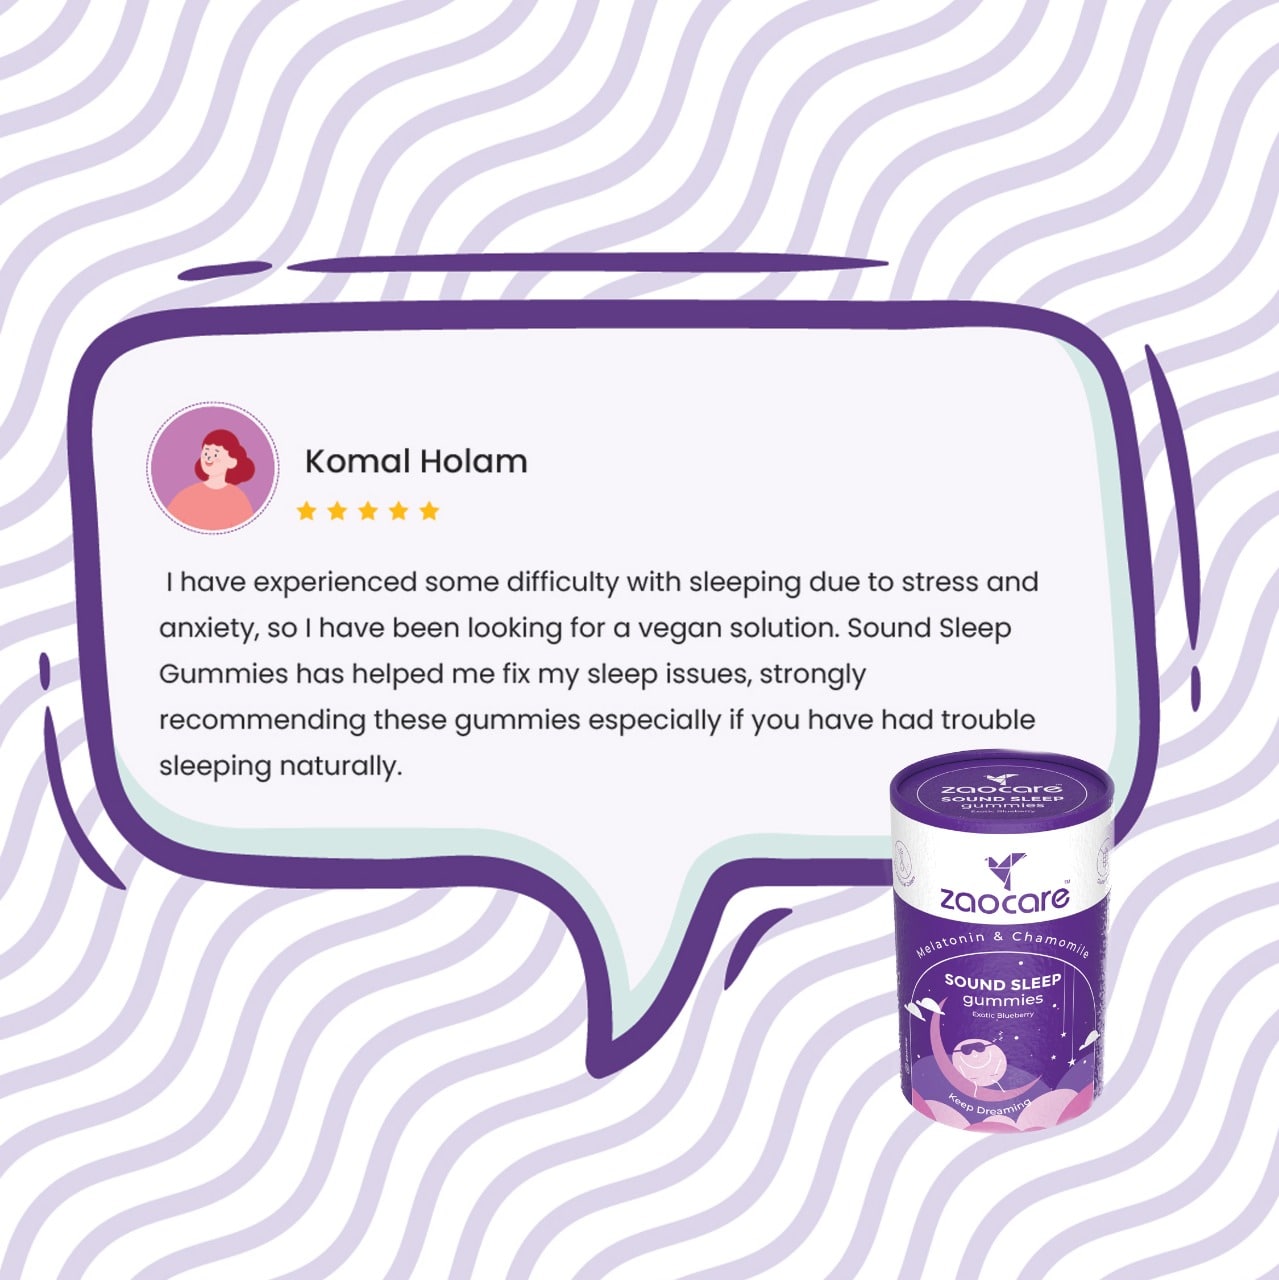 Customer testimonial by Komal Holam with a five-star rating, praising the effectiveness of Zaocare Sound Sleep Gummies for resolving sleep difficulties related to stress and anxiety, and recommending them for those seeking a vegan option for better sleep.